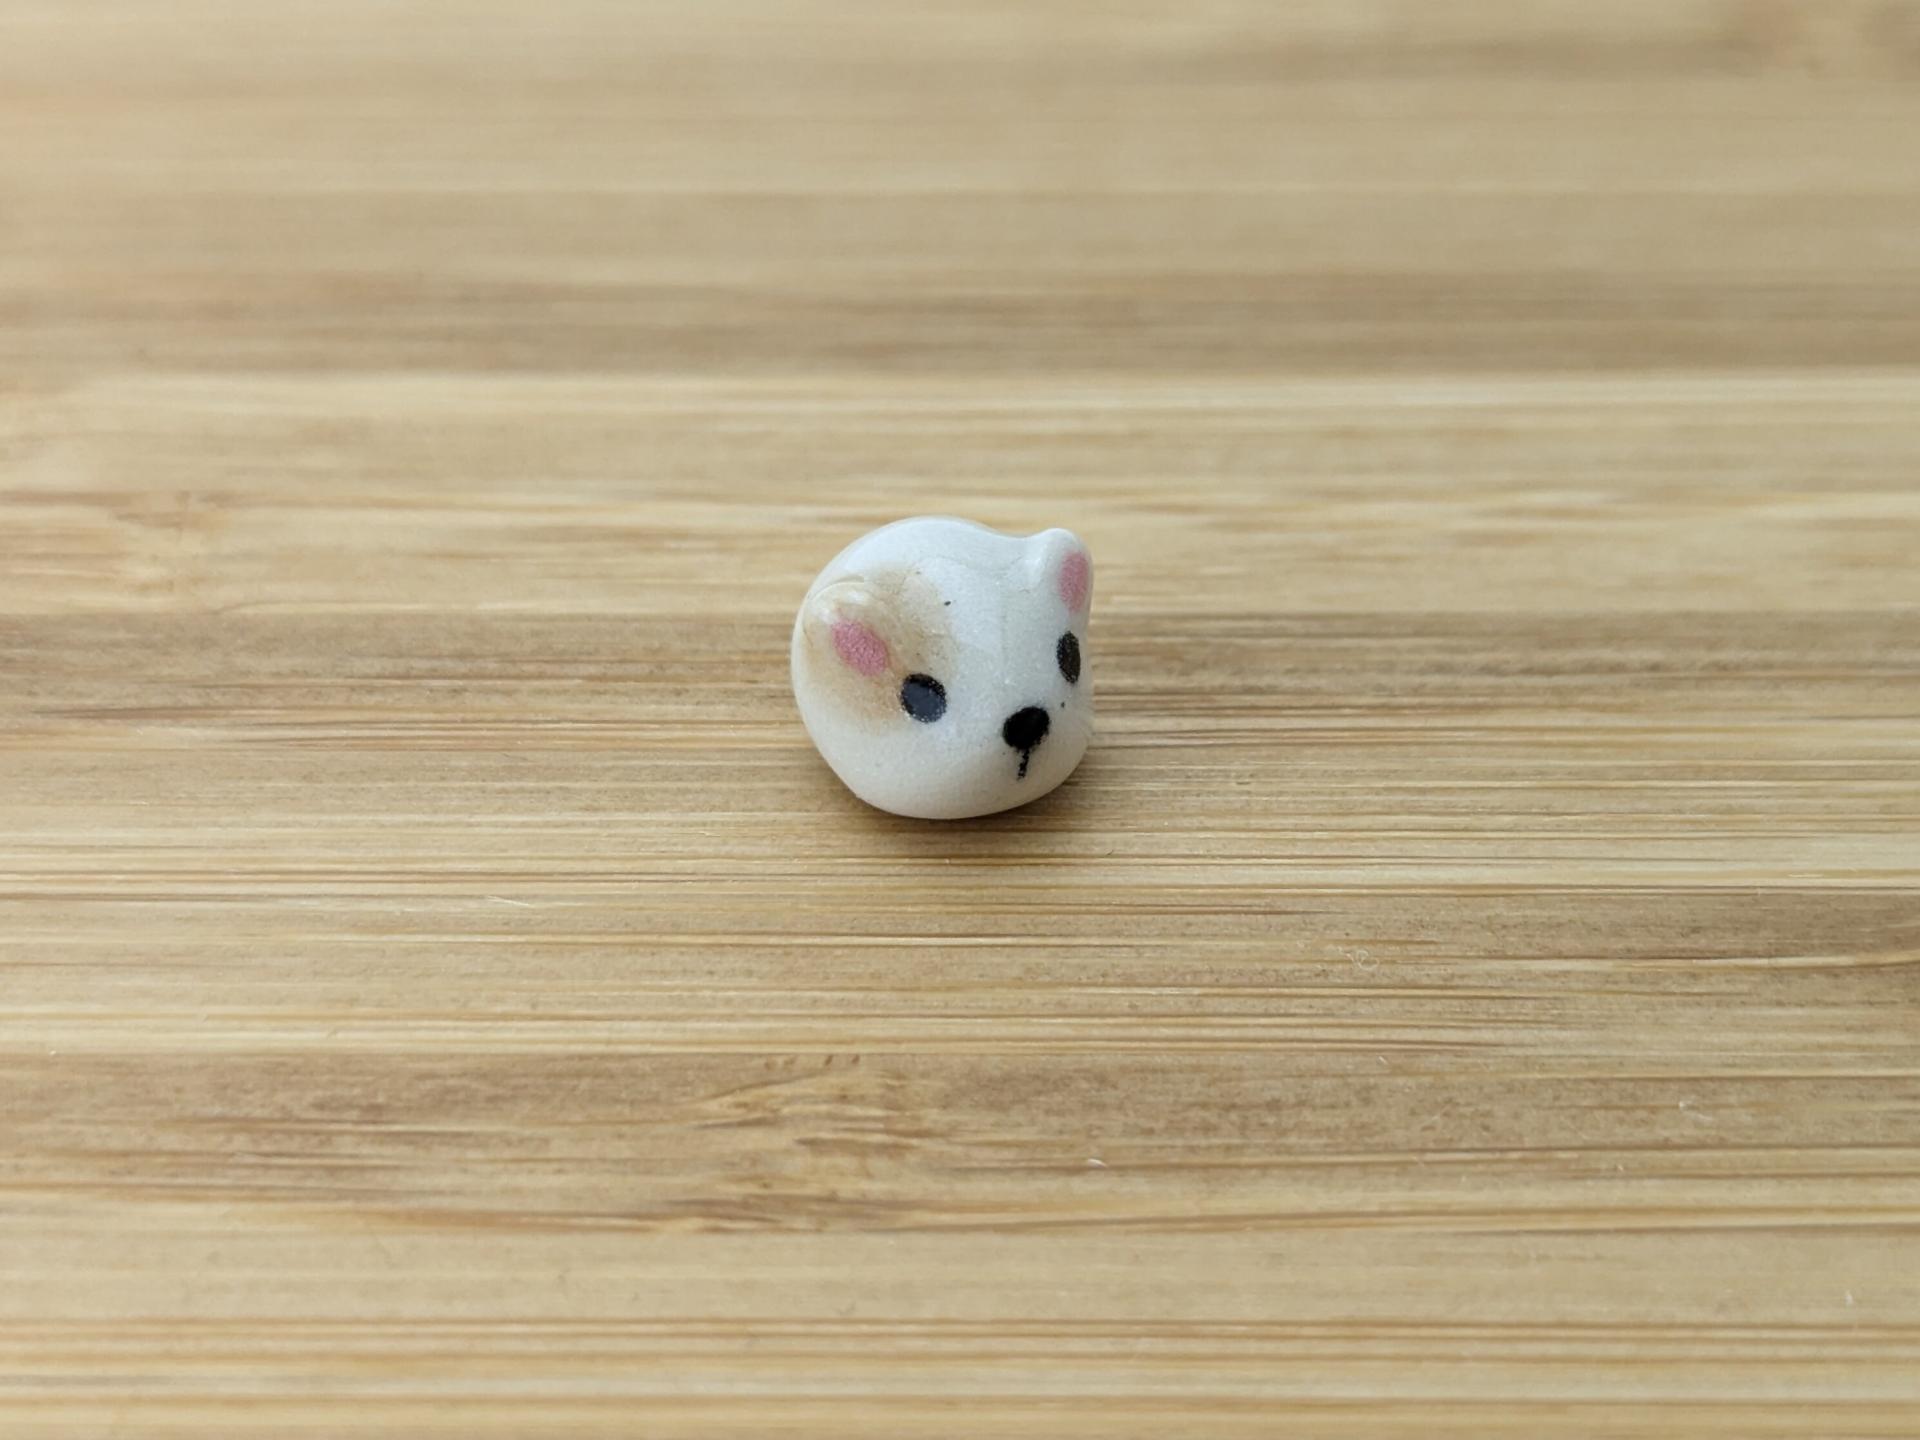 Cute handmde ceramic hamster figurine. Fight hunger with tiny Hamster of Hope. Small-batch ceramics. Hand-painted pottery.